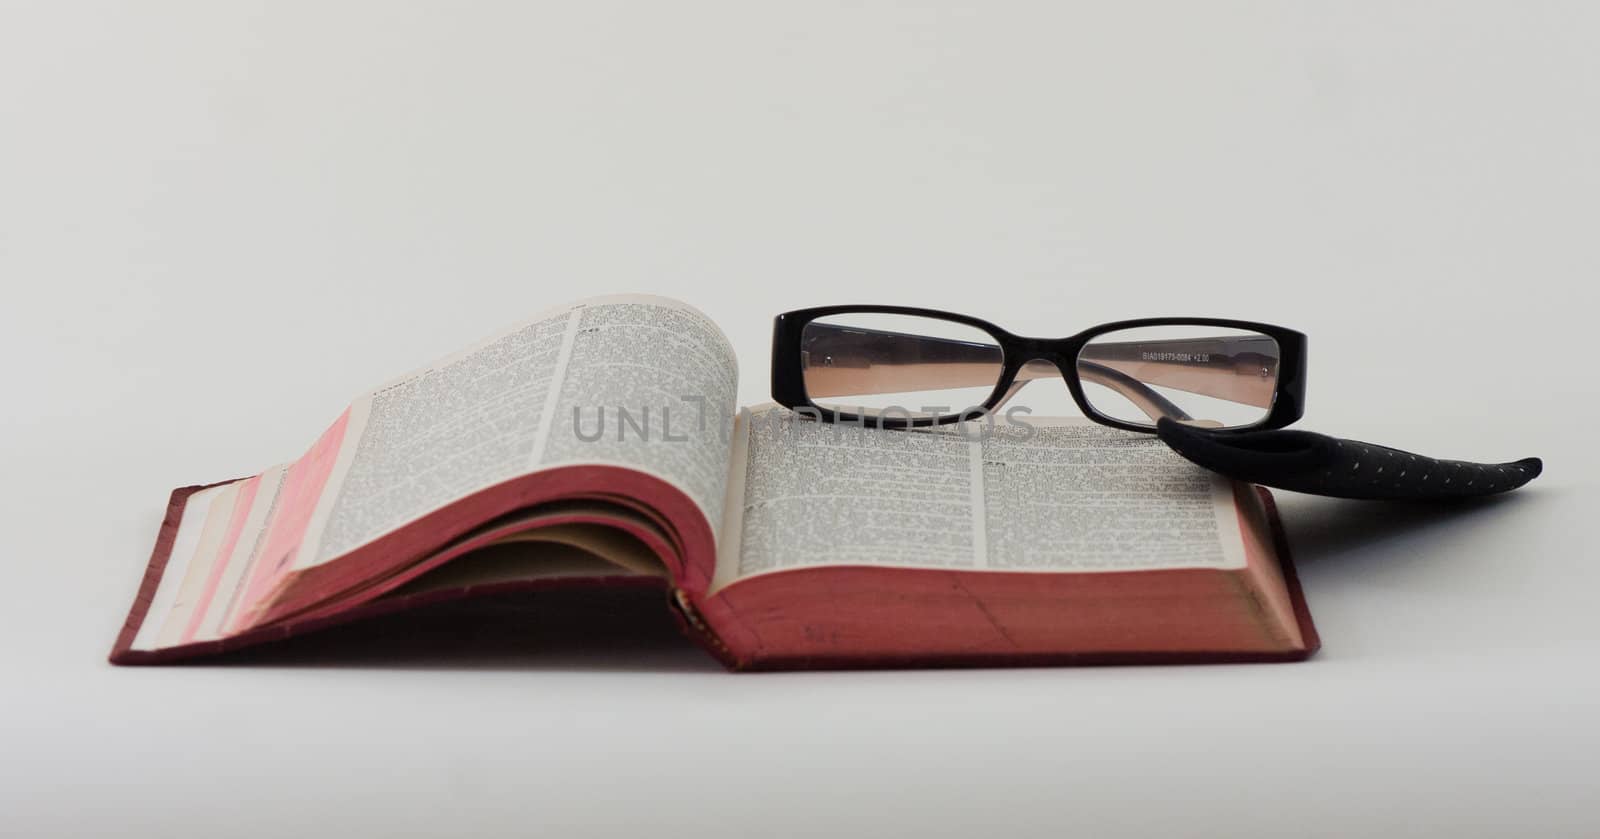 A pair of reading glasses resting on the bible.